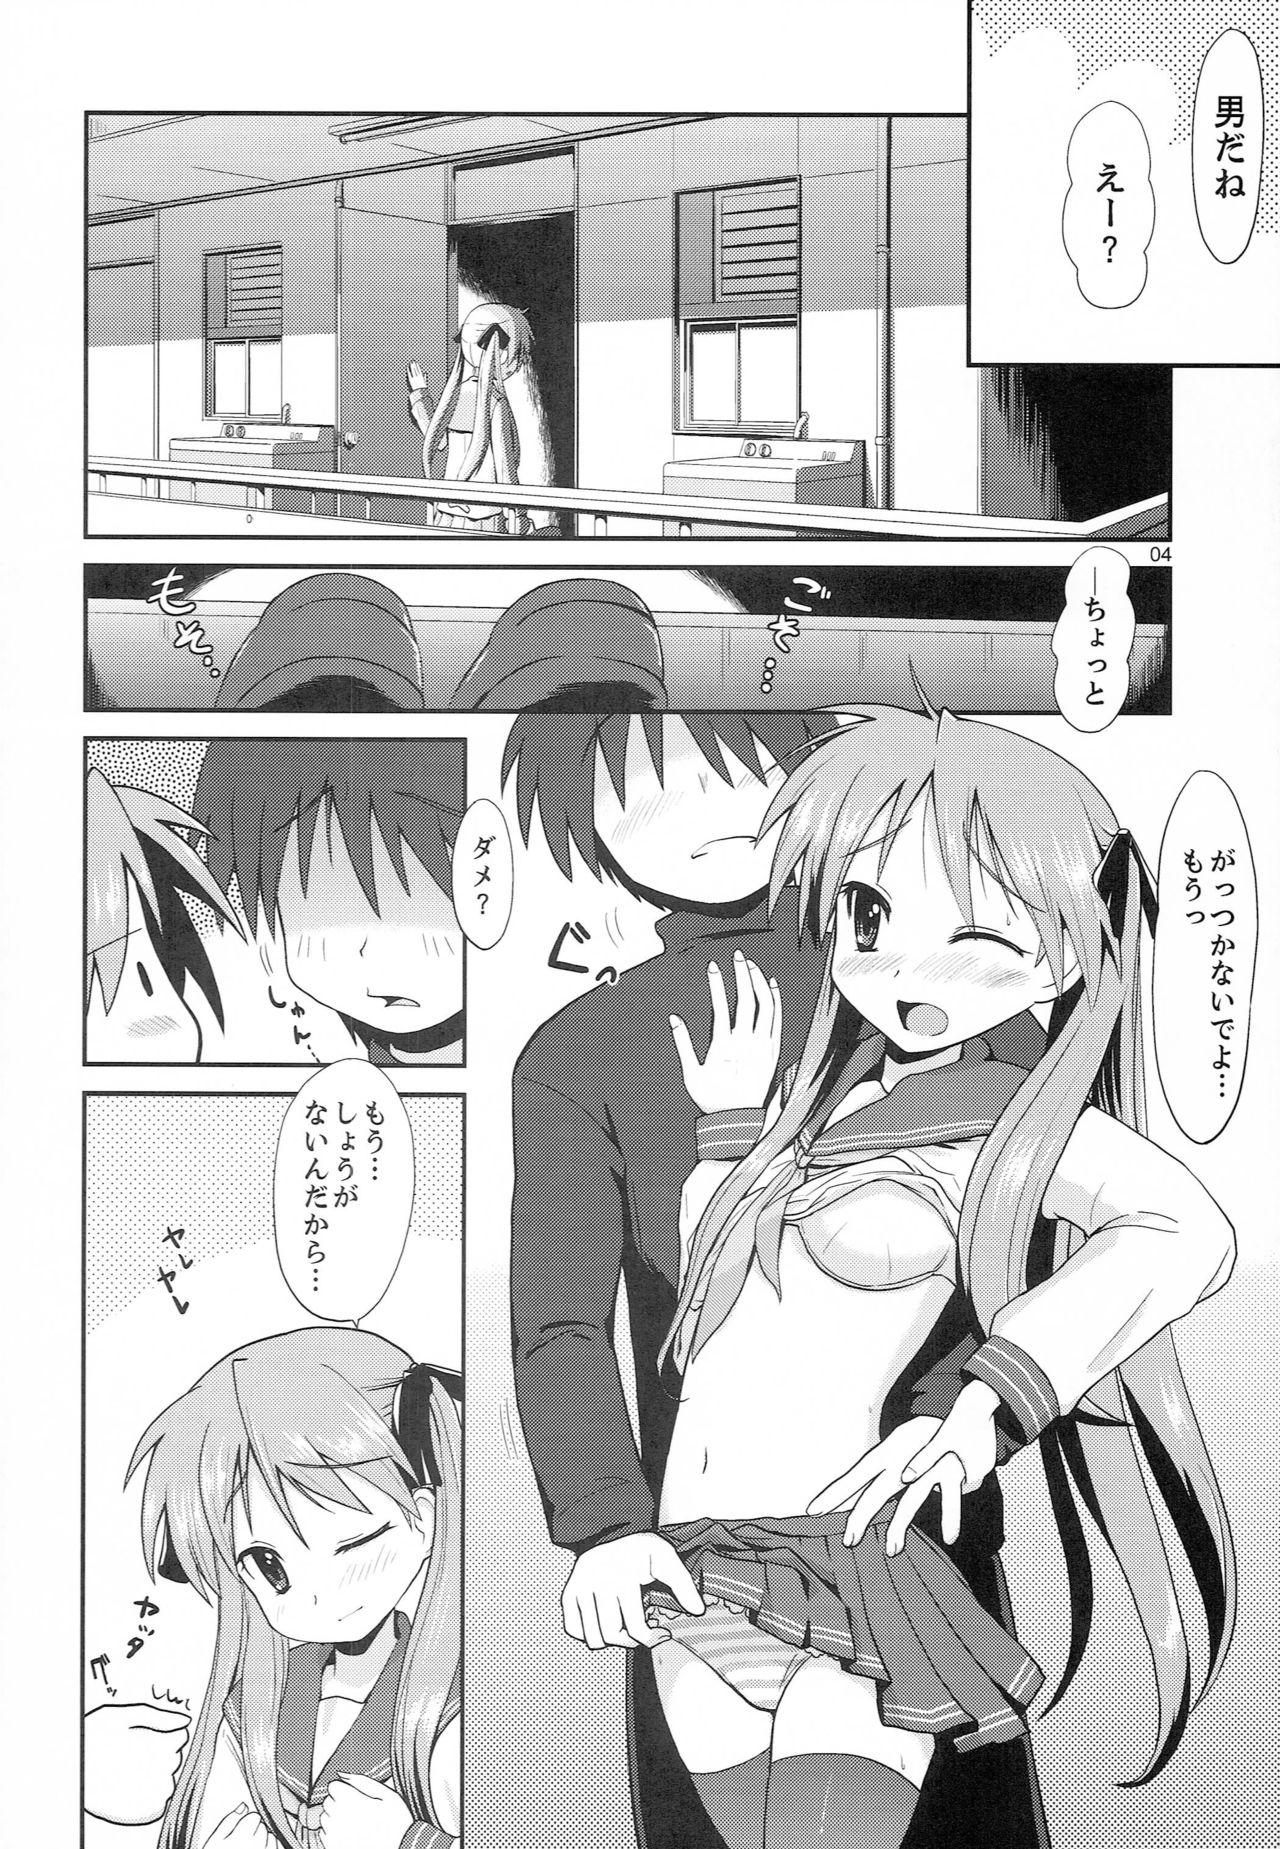 Perra Houkago no Kagamin - Lucky star Highheels - Page 3